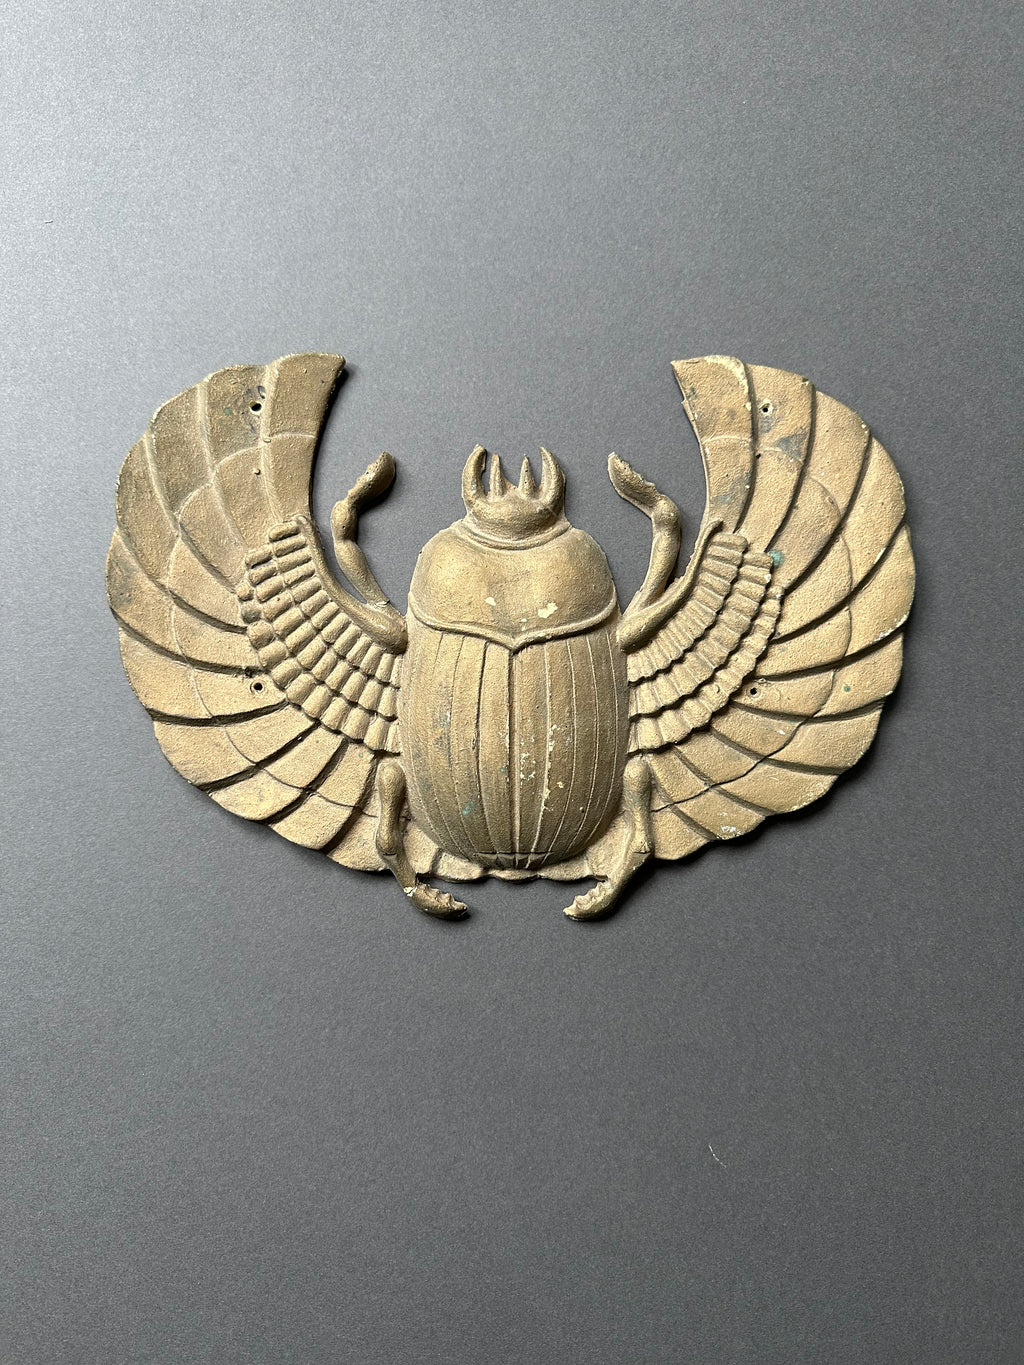 The Mummy Returns (2001)- A Prop Scarab Treasure Decal